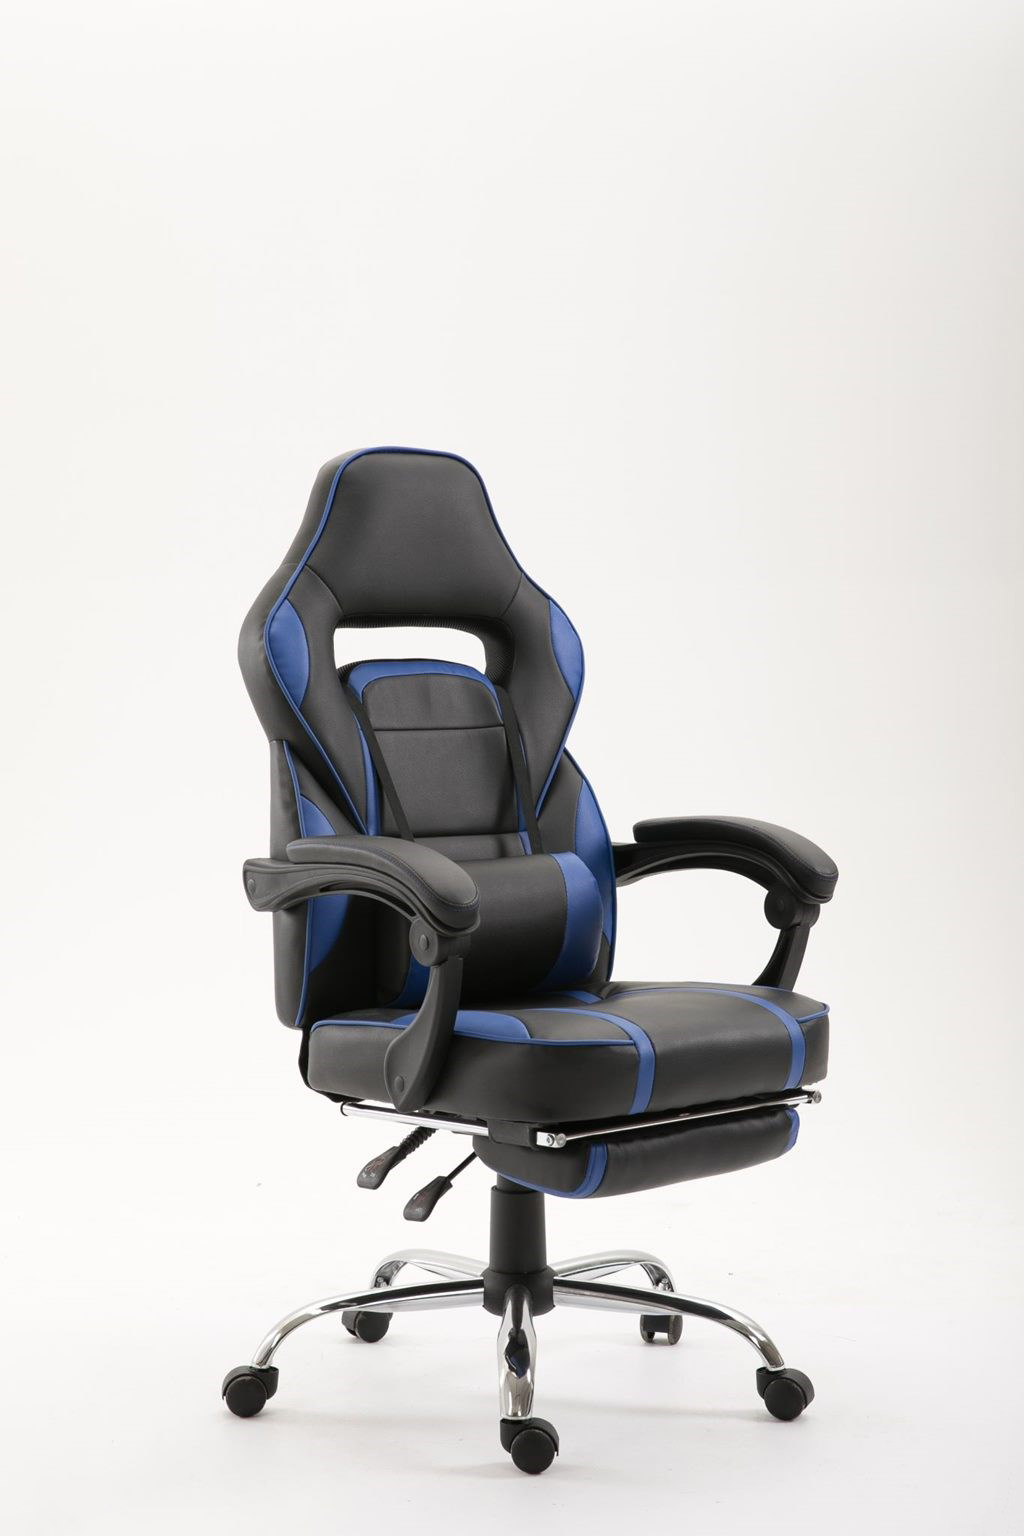 Gaming Chair Office Chair NEW !!!!! - Dealsdirect.co.nz